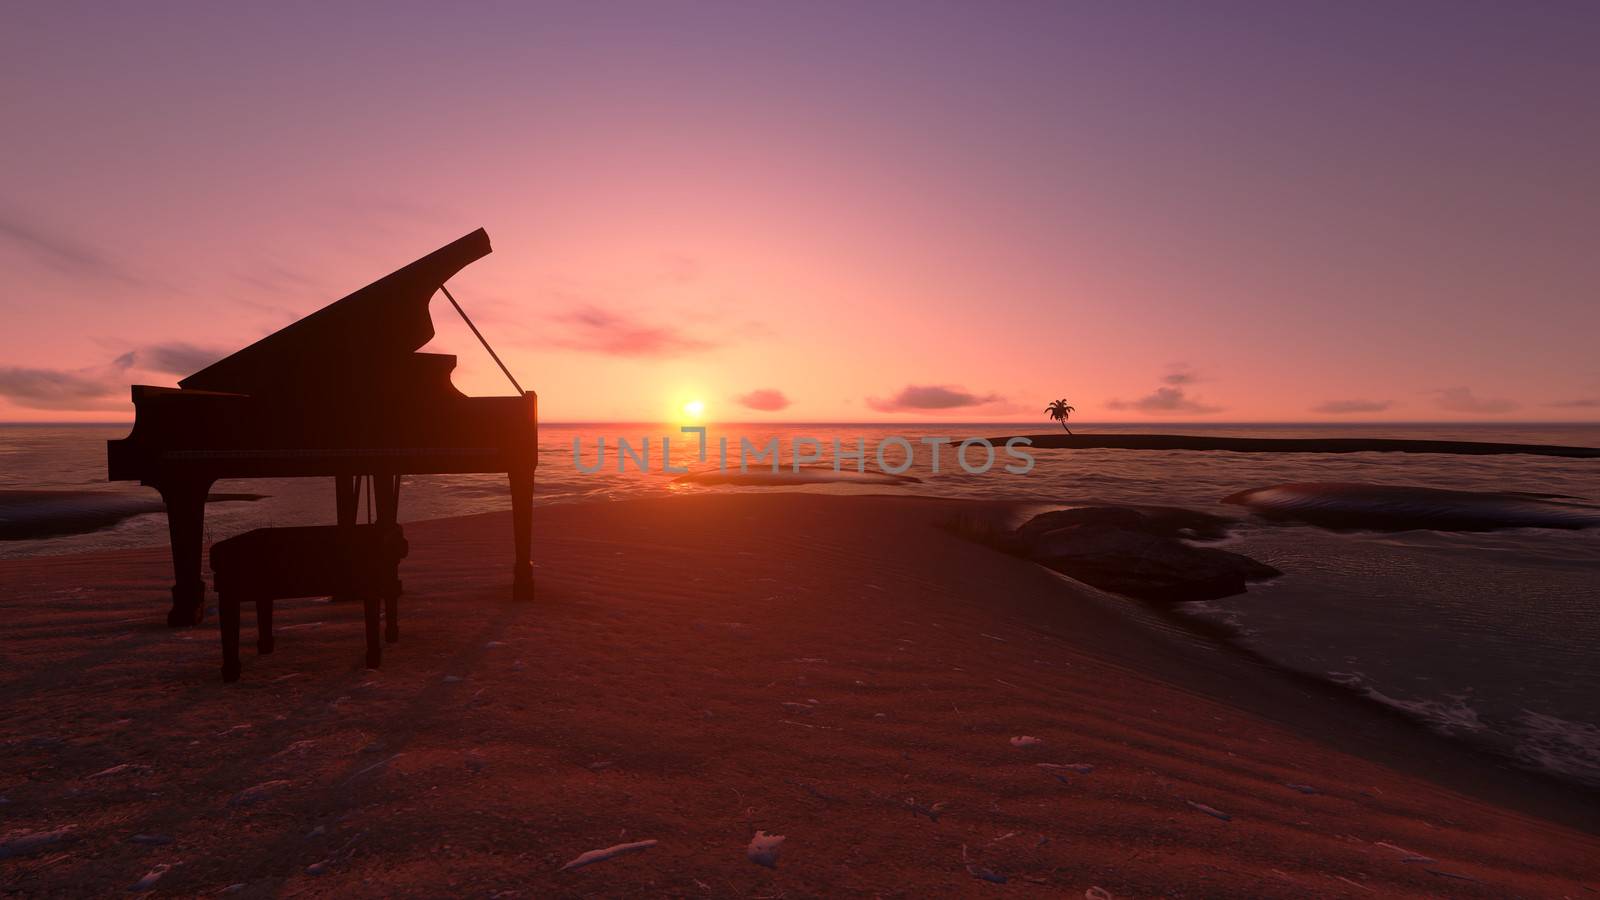 Piano on the beach in the sunset.